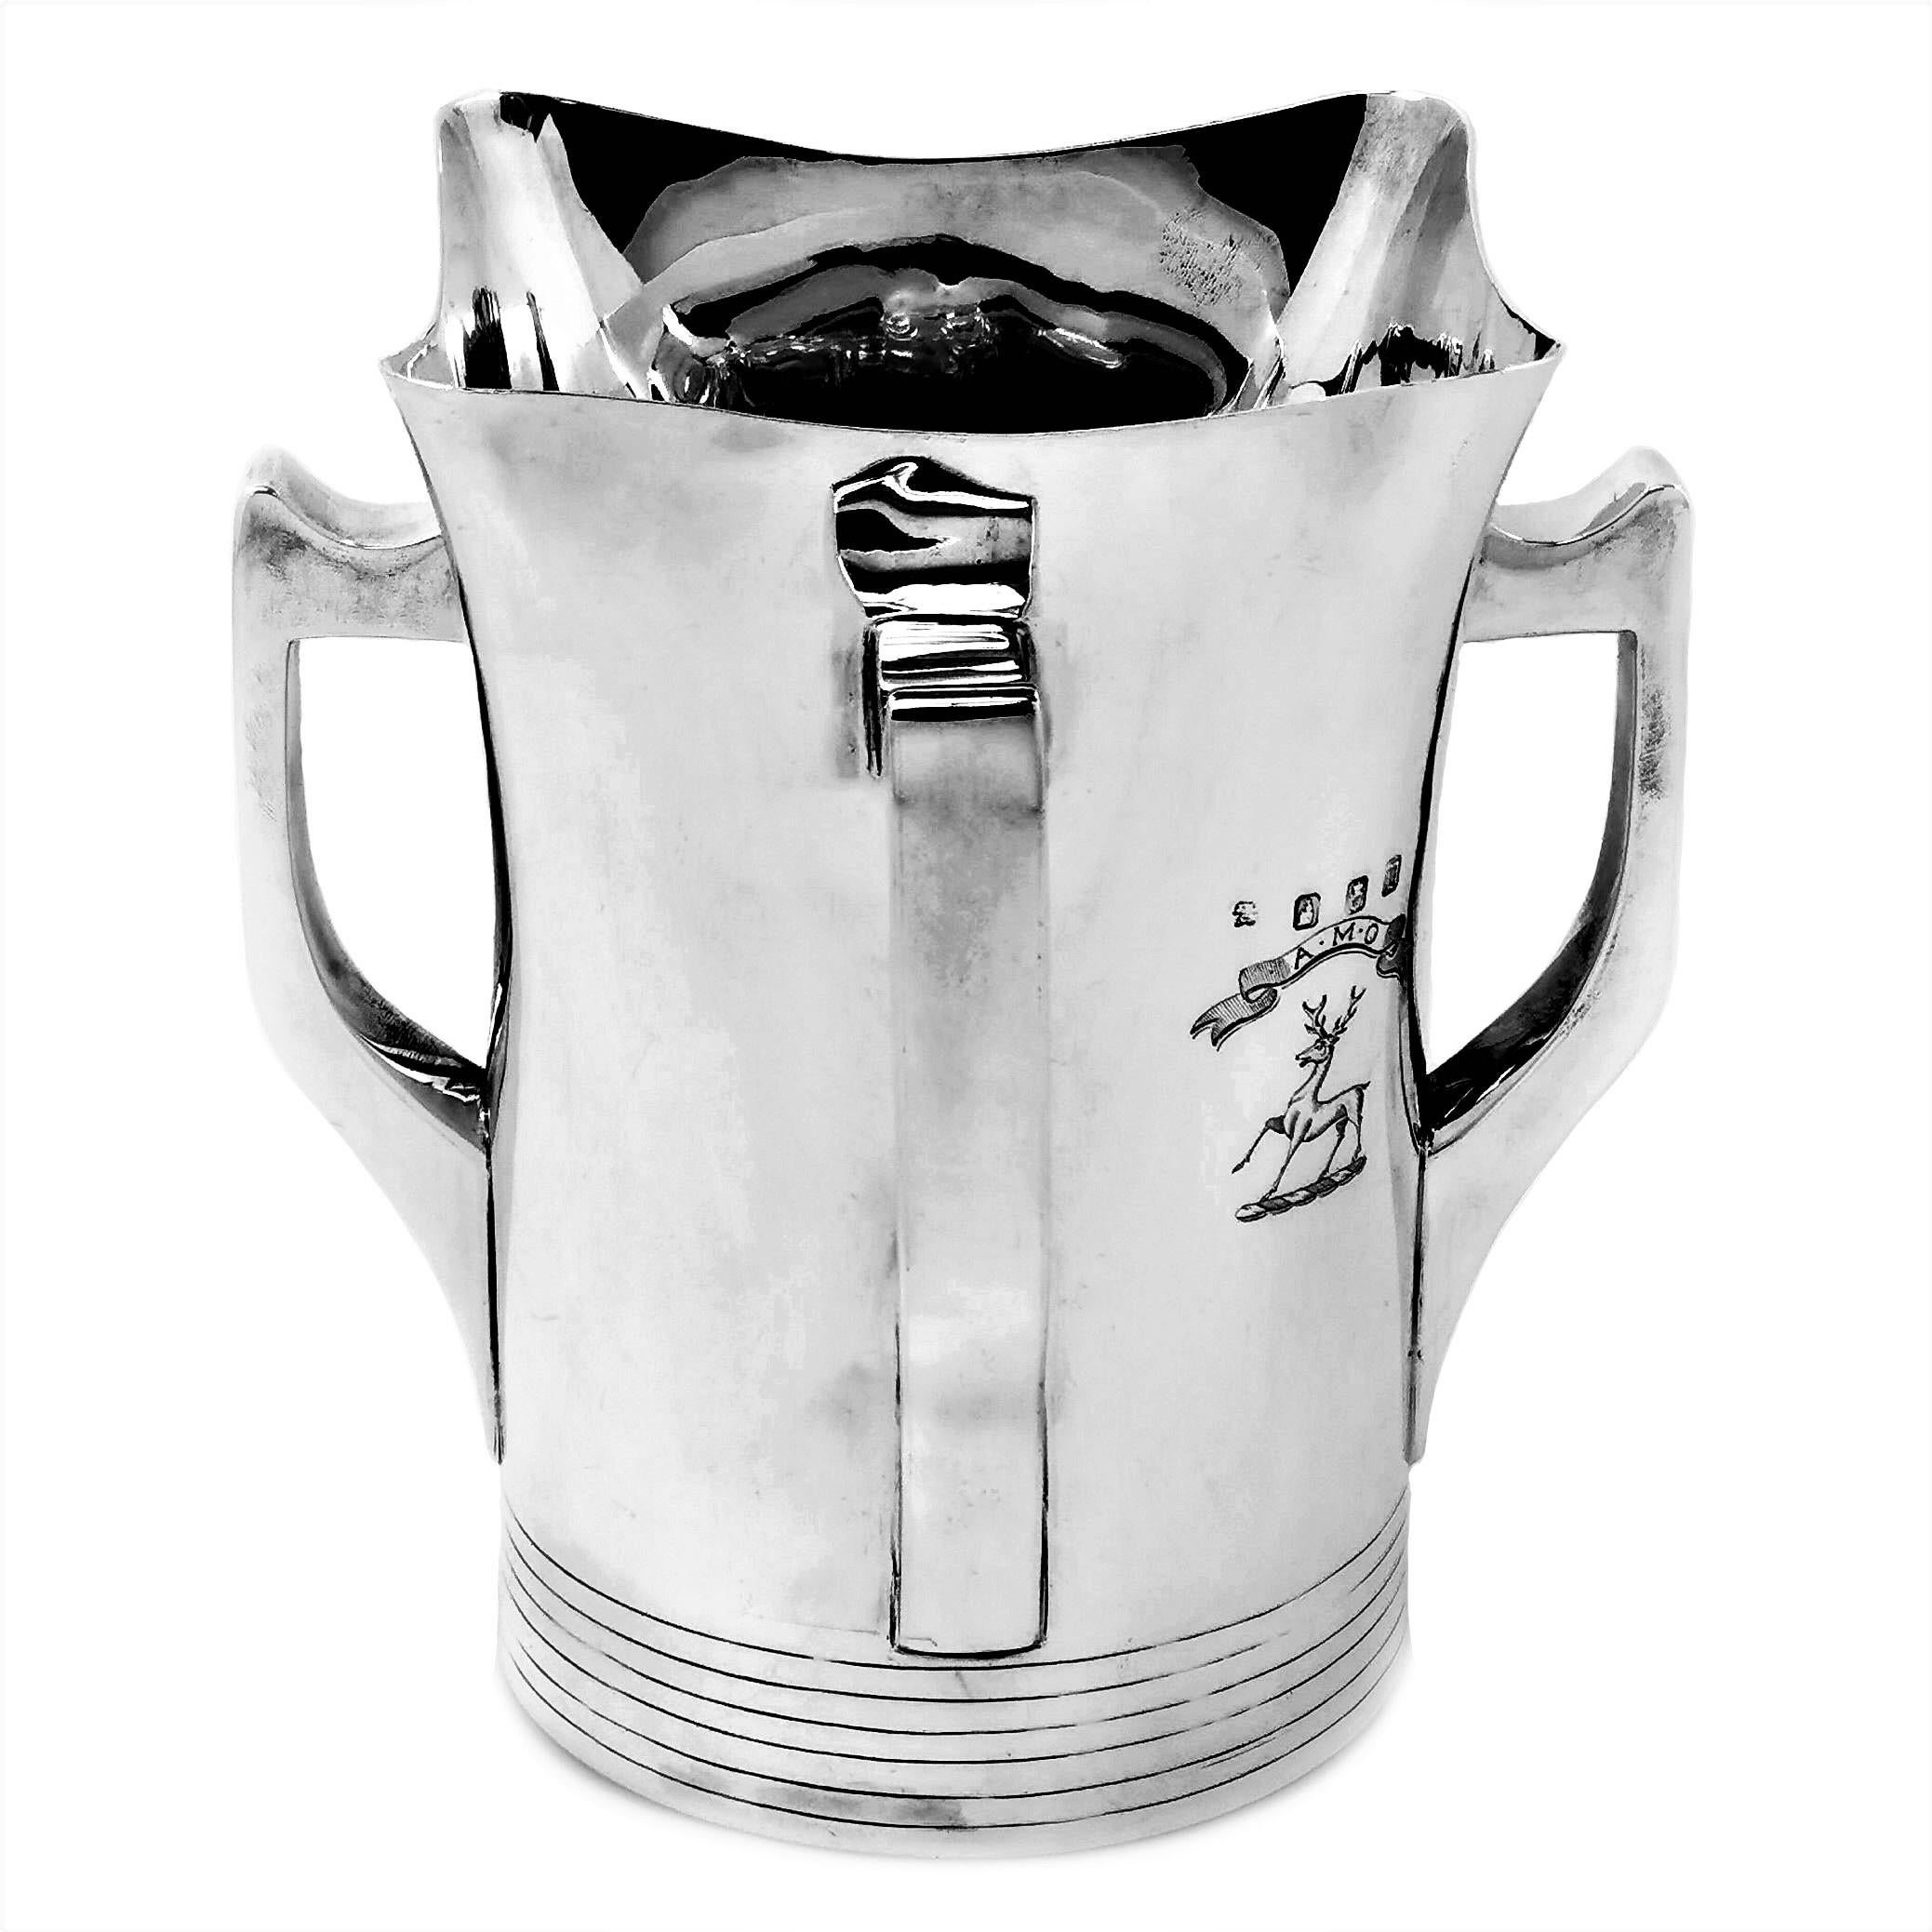 An impressive Antique Irish Silver Vase or cooler in the shape of a traditional Irish silver Mether mead drinking cup. The Mether Cup has a rounded square form with a handle on each side. The Cup has a small crest engraved on the side.
Inspired by